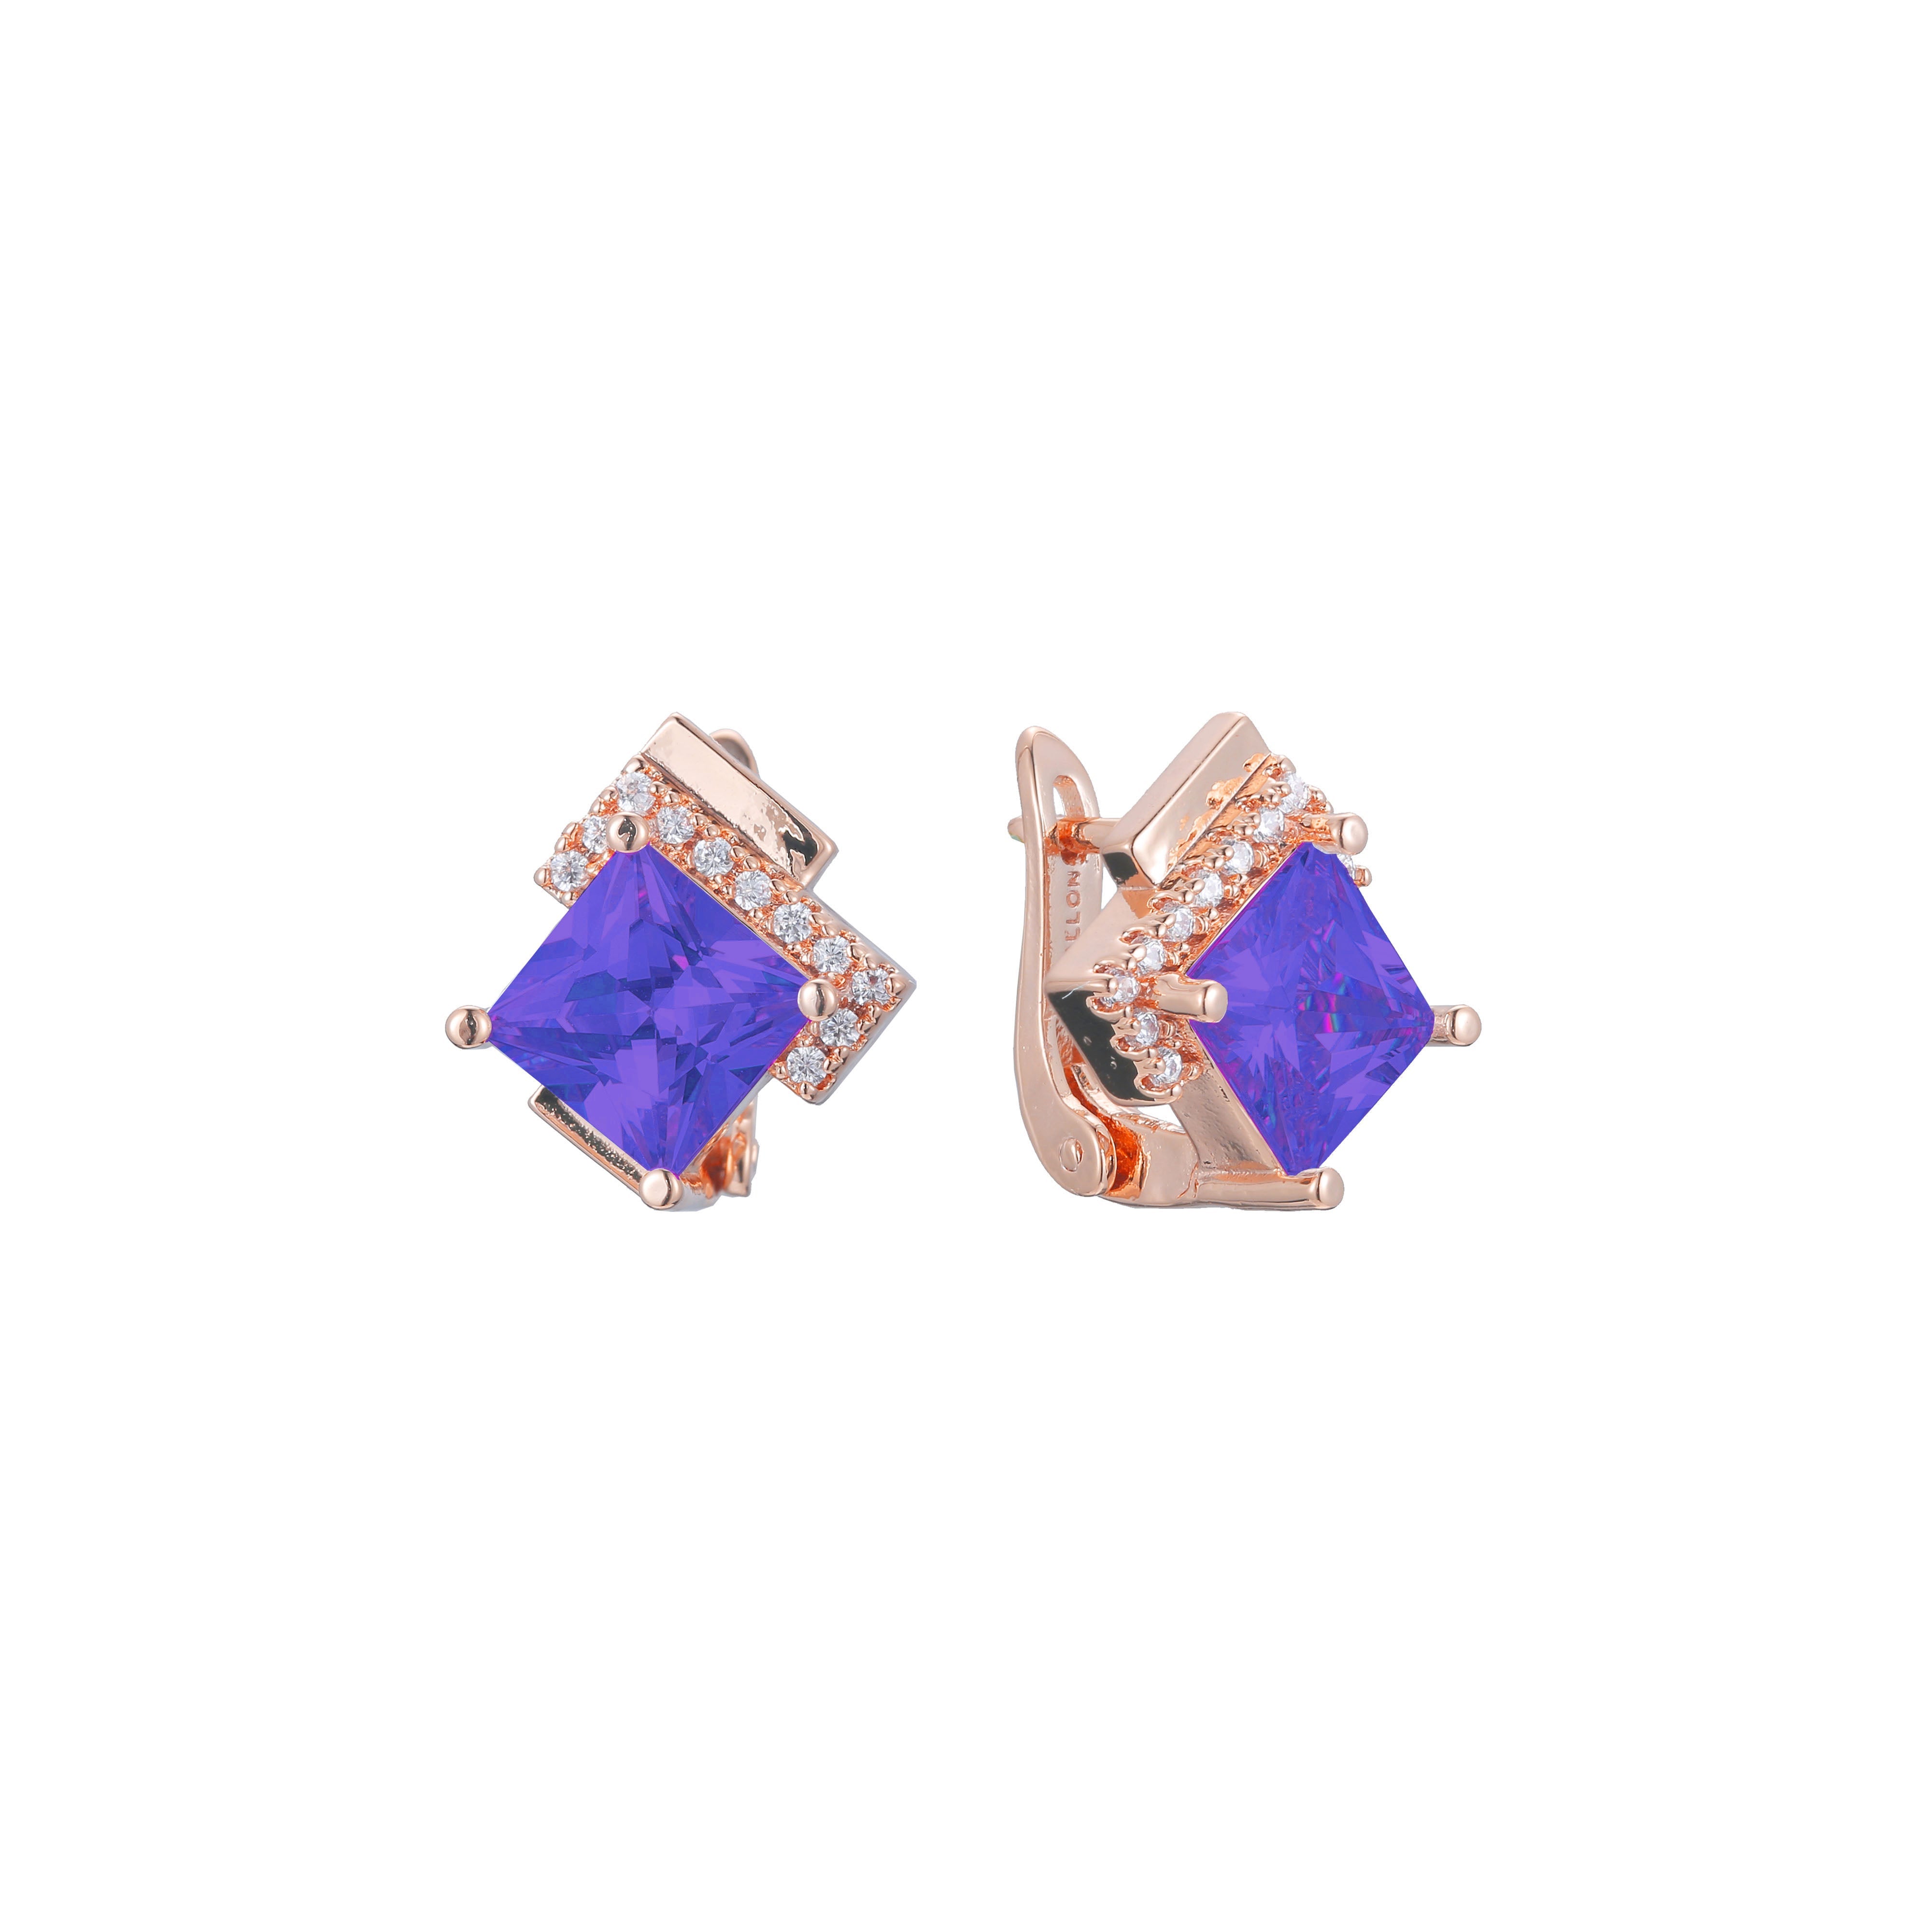 Solitaire emerald cut big stone earrings in 14K Gold, 18K Gold, Rose Gold plating colors